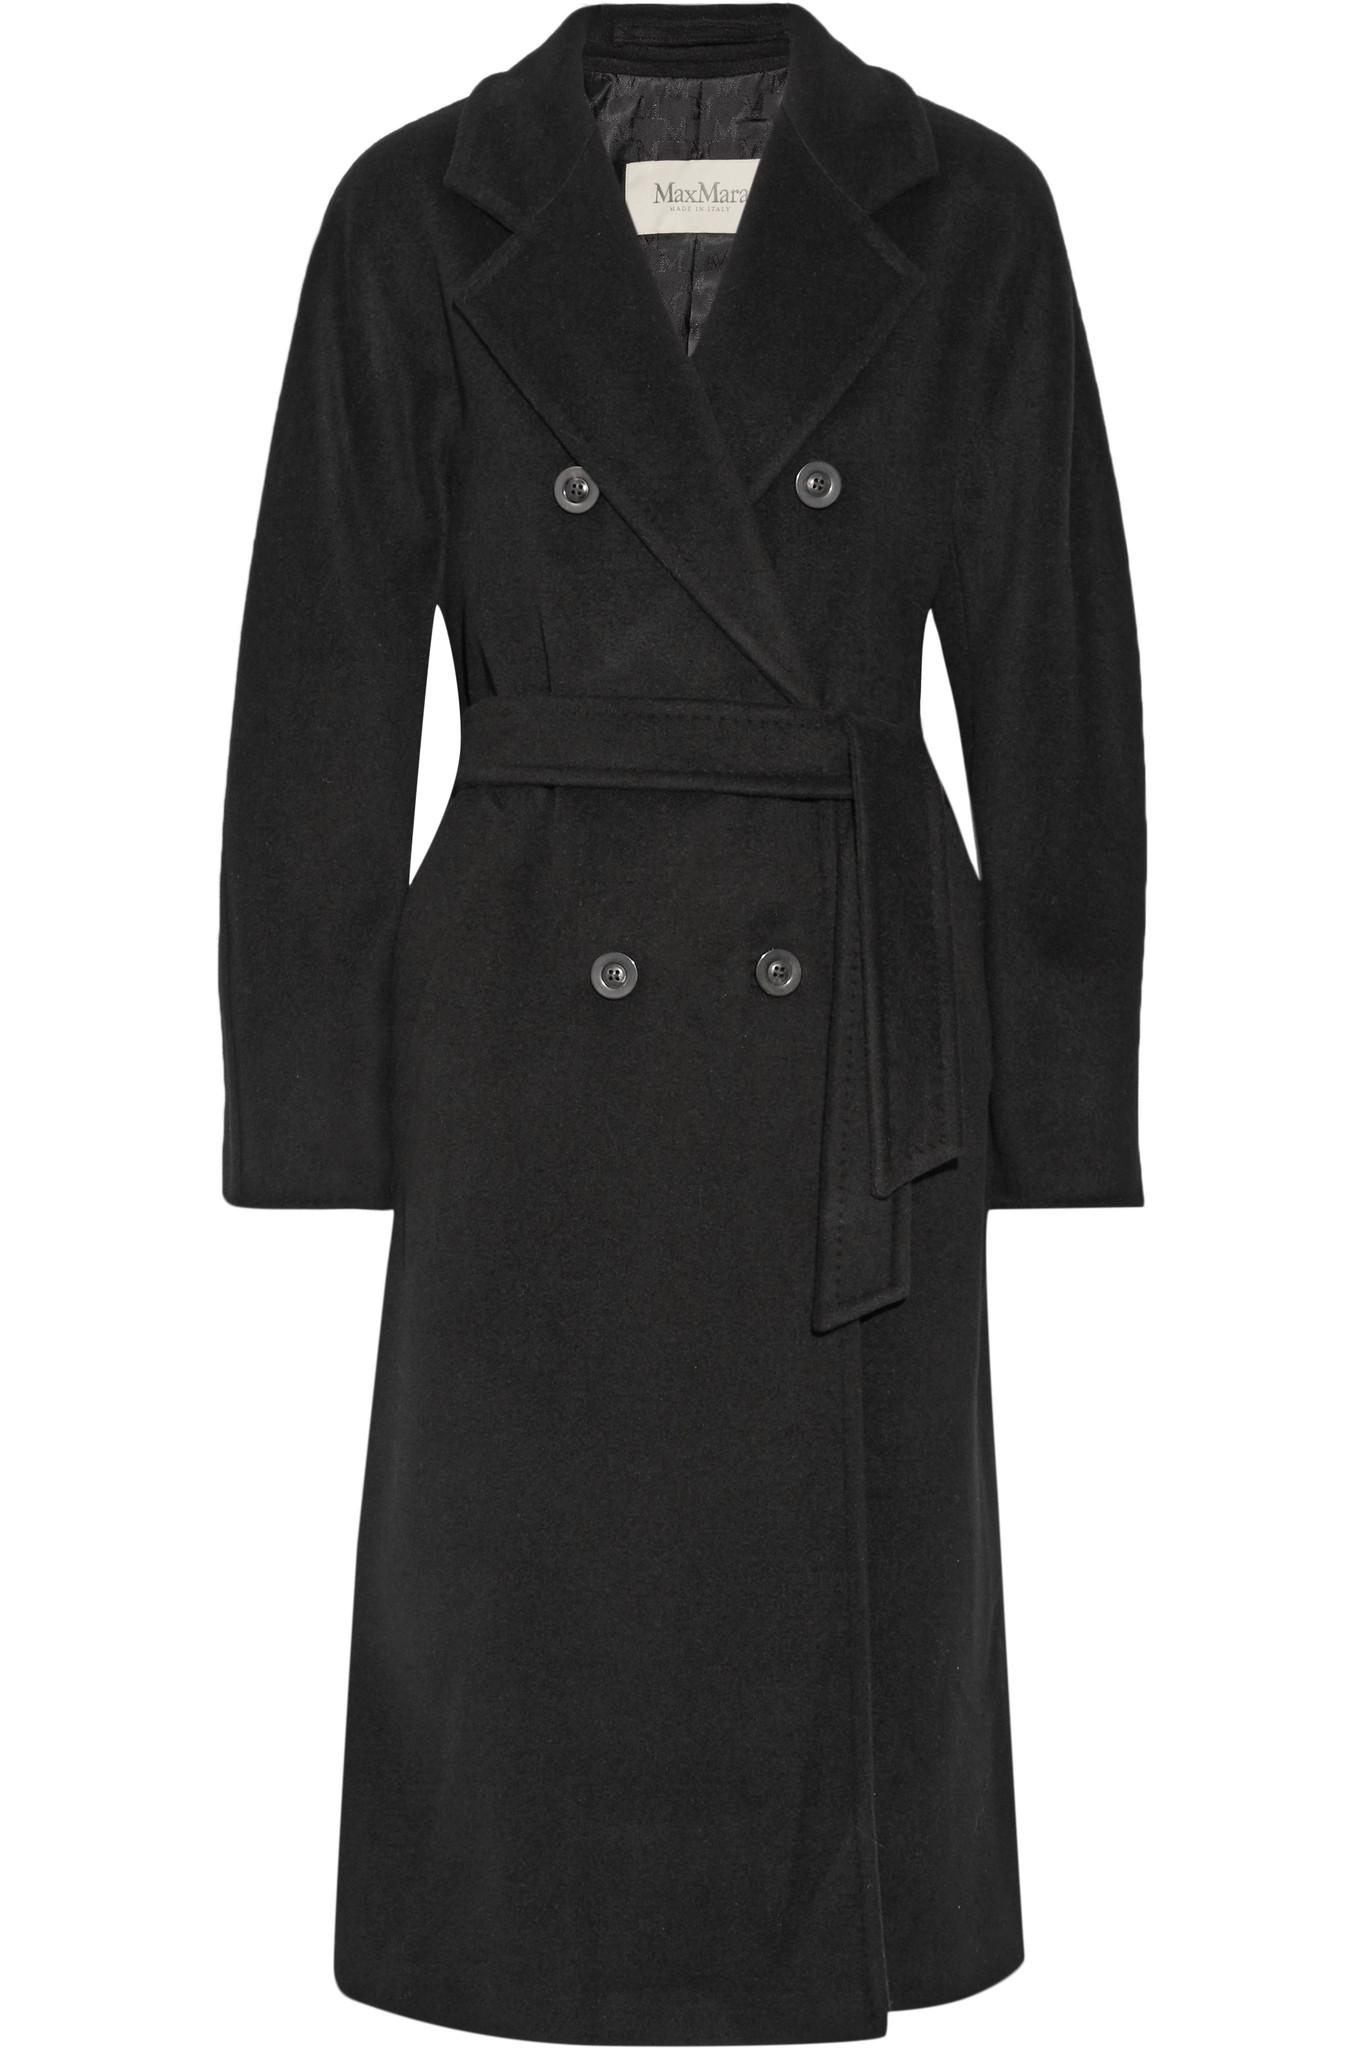 Lyst - Max mara Madame 101801 Wool And Cashmere-blend Coat in Black